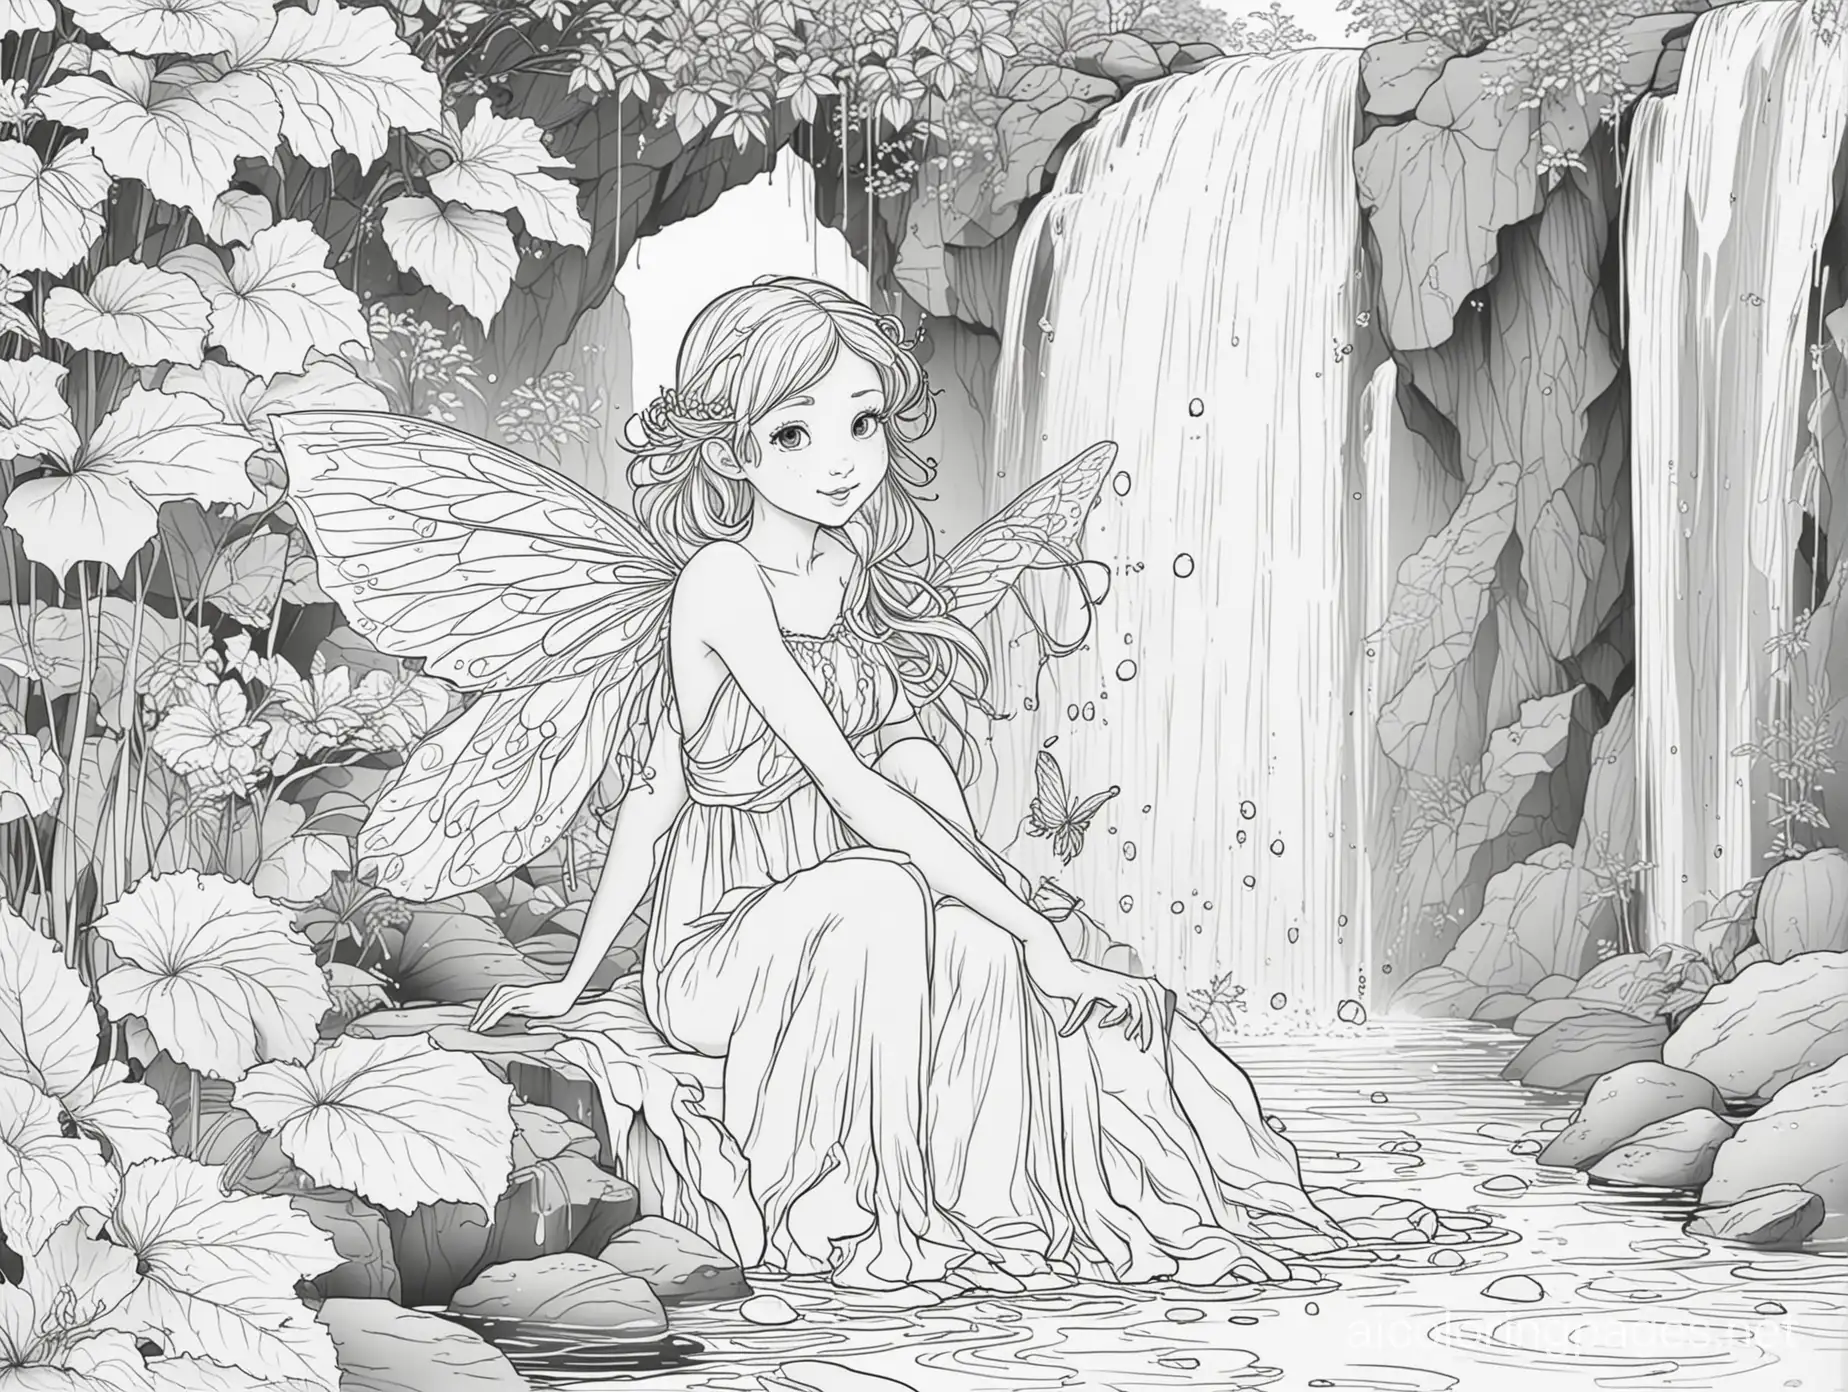 water fairy in a waterfall, Coloring Page, black and white, line art, white background, Simplicity, Ample White Space. The background of the coloring page is plain white to make it easy for young children to color within the lines. The outlines of all the subjects are easy to distinguish, making it simple for kids to color without too much difficulty